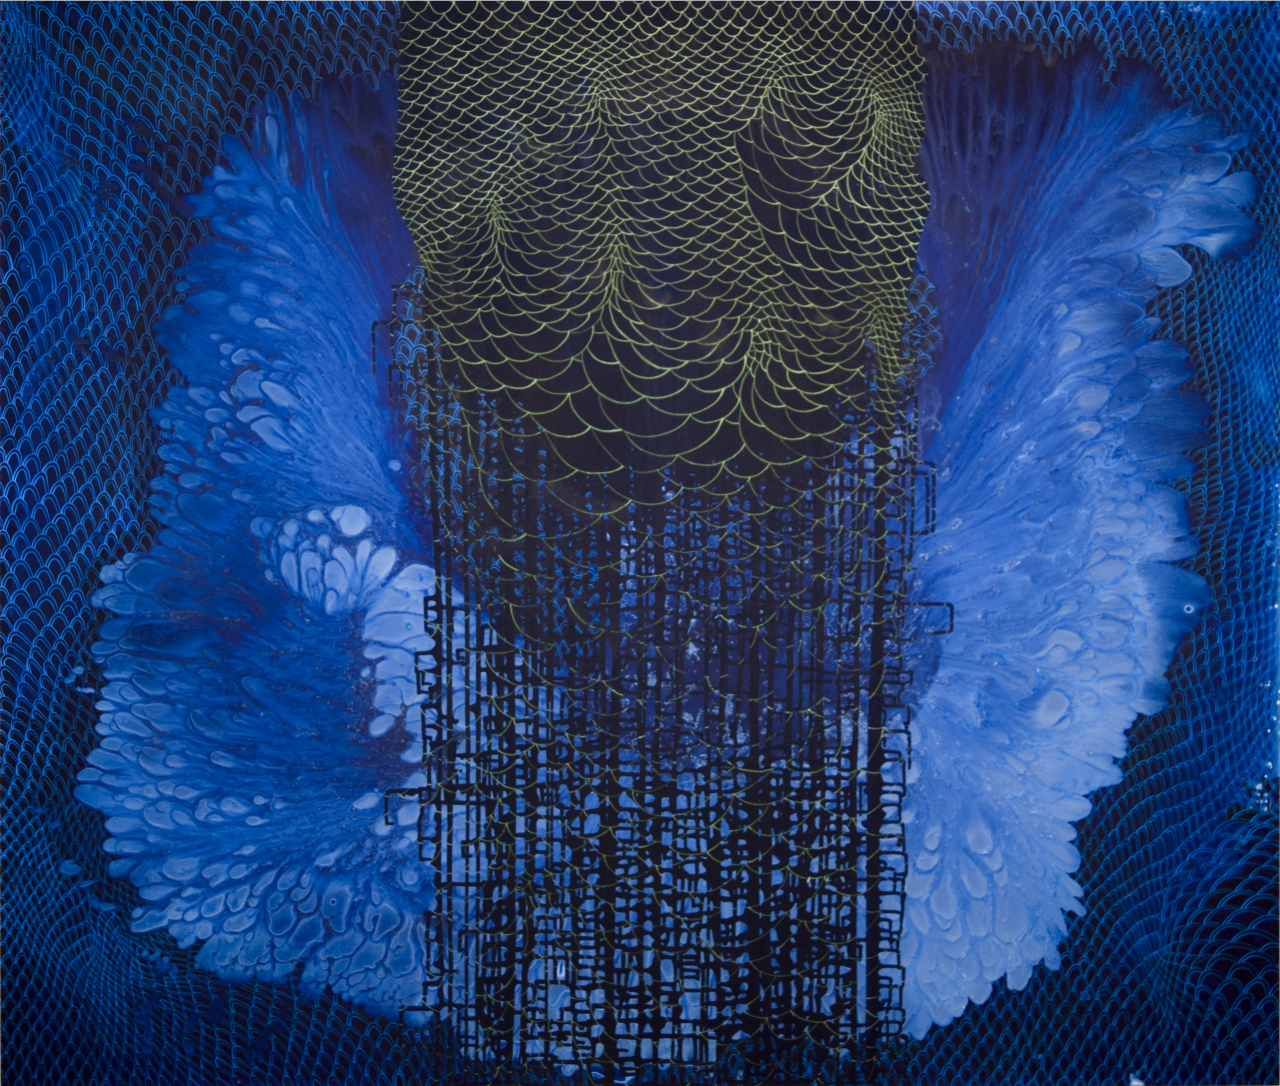 Yellow-outlined, navy scales turn into black, irregular latticework down the center of the painting over a splash of blue and white like a wave, surrounded by a shifting, three-dimensional black and blue grid.